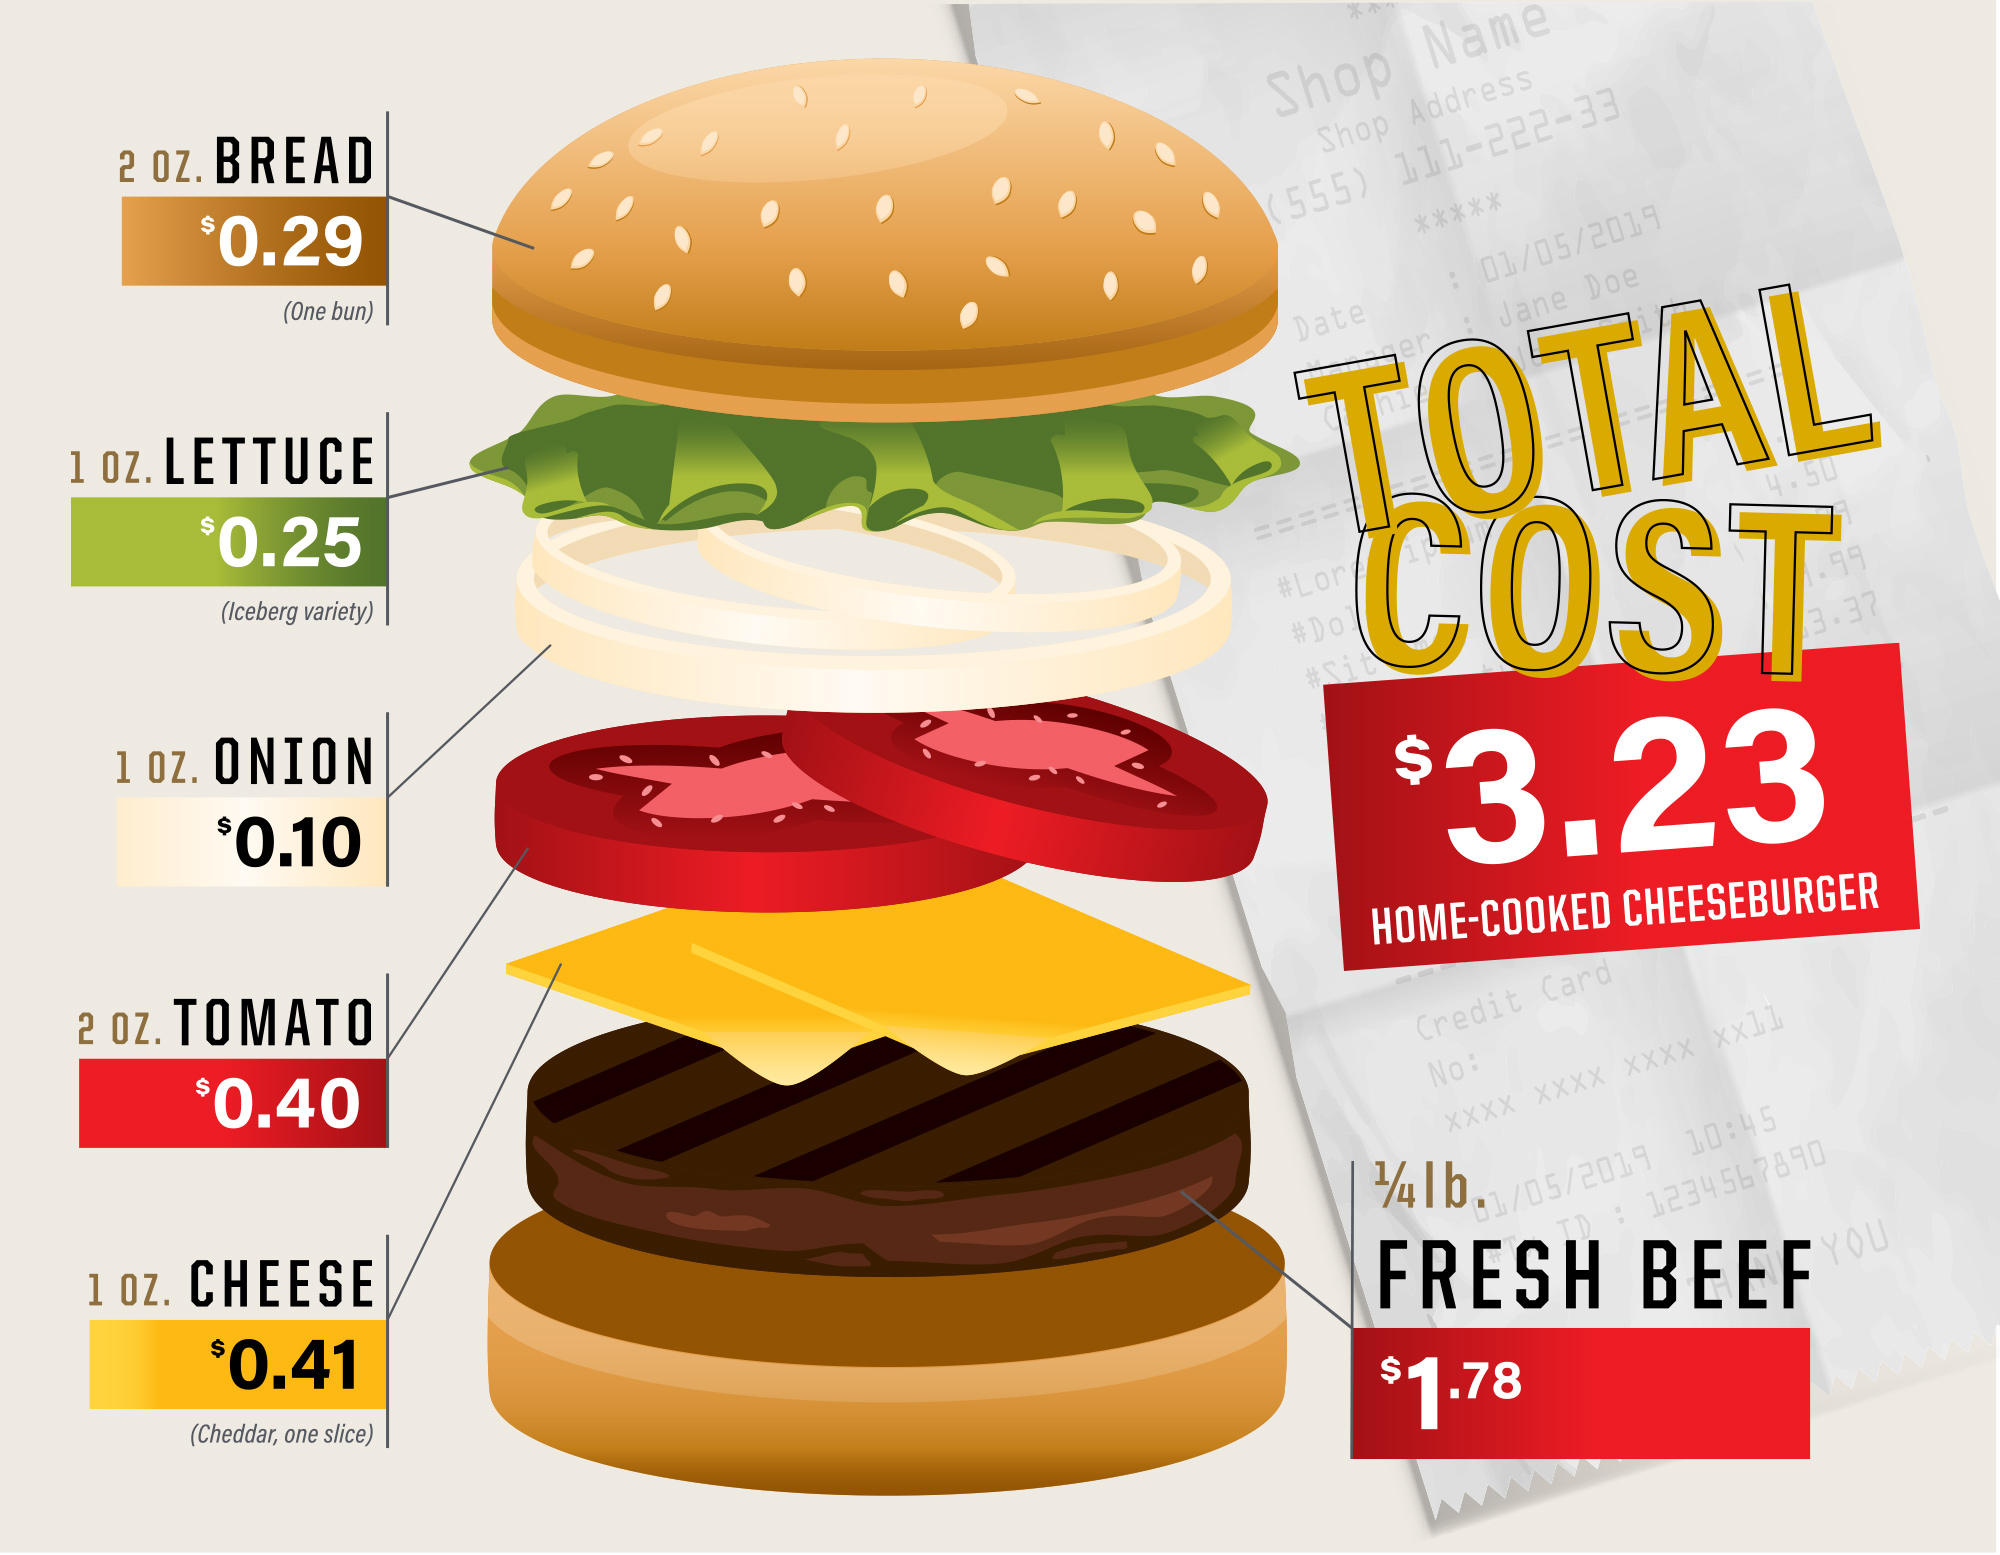 The total cost of a home-cooked burger using ¼ lb. fresh ground beef, one 2 oz. bun, 1 oz. lettuce, 1 oz. onion, 2 oz. tomato and one 1 oz. slice of cheese is $3.23.